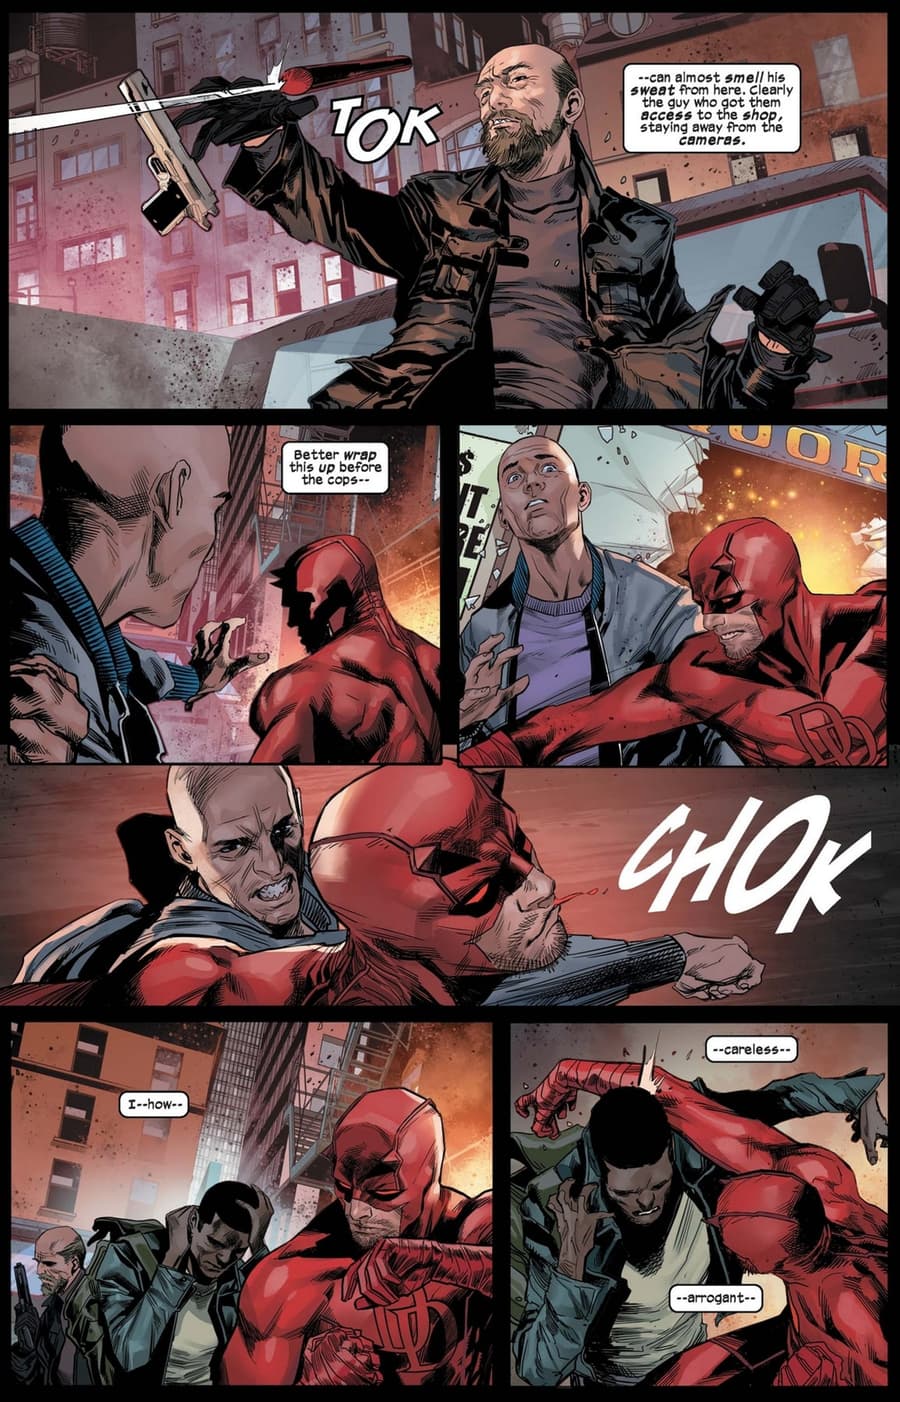 DAREDEVIL (2019) #1 page by Chip Zdarsky and Marco Checchetto